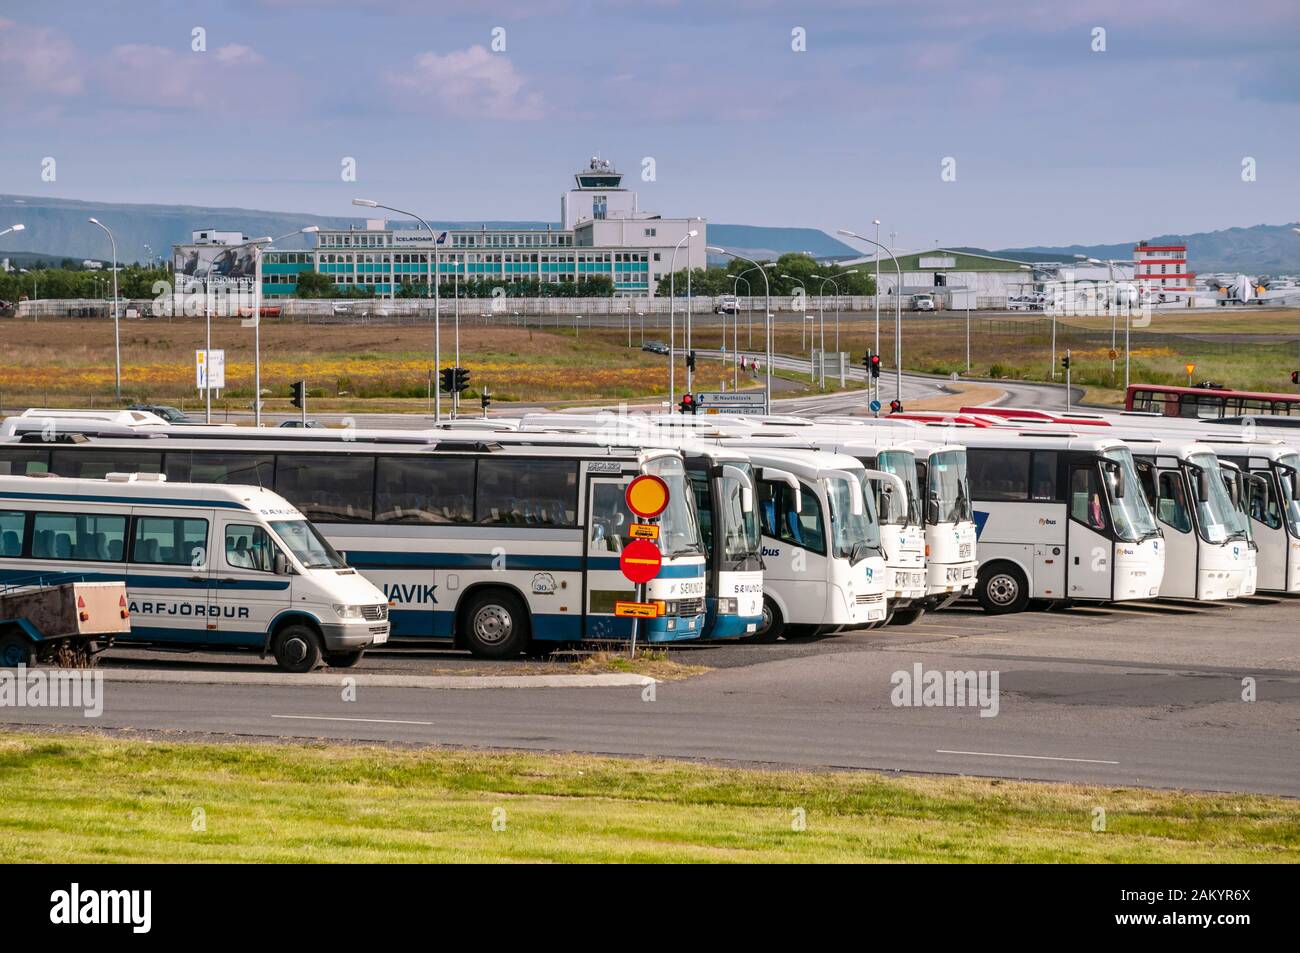 BSI bus terminal, starting point for all the tour buses, Reykjavik Domestic Airport at the rear, Reykjavik, Iceland Stock Photo